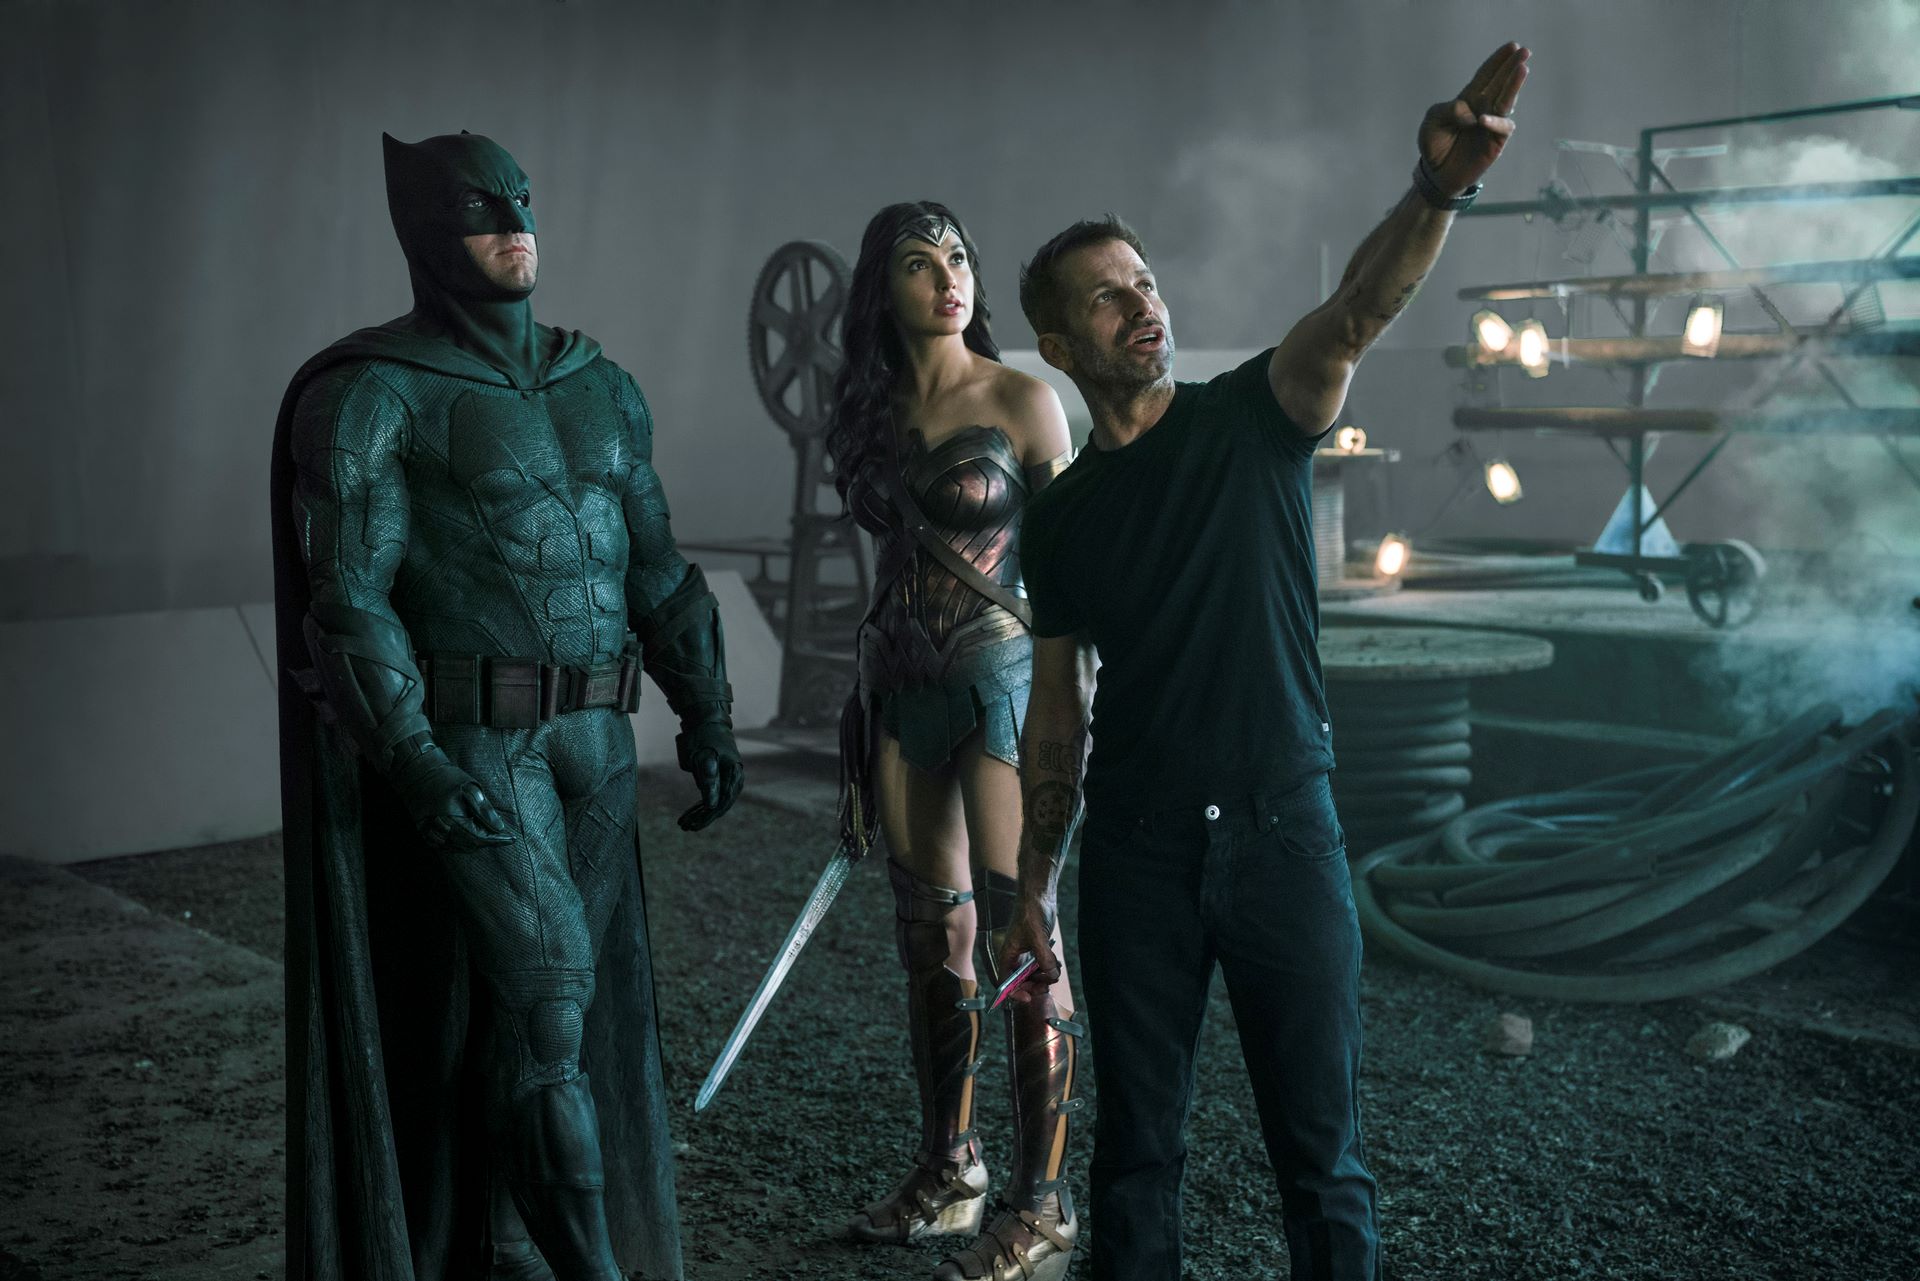 Ben Affleck, Gal Gadot, and Zack Snyder on the set of 'Justice League'